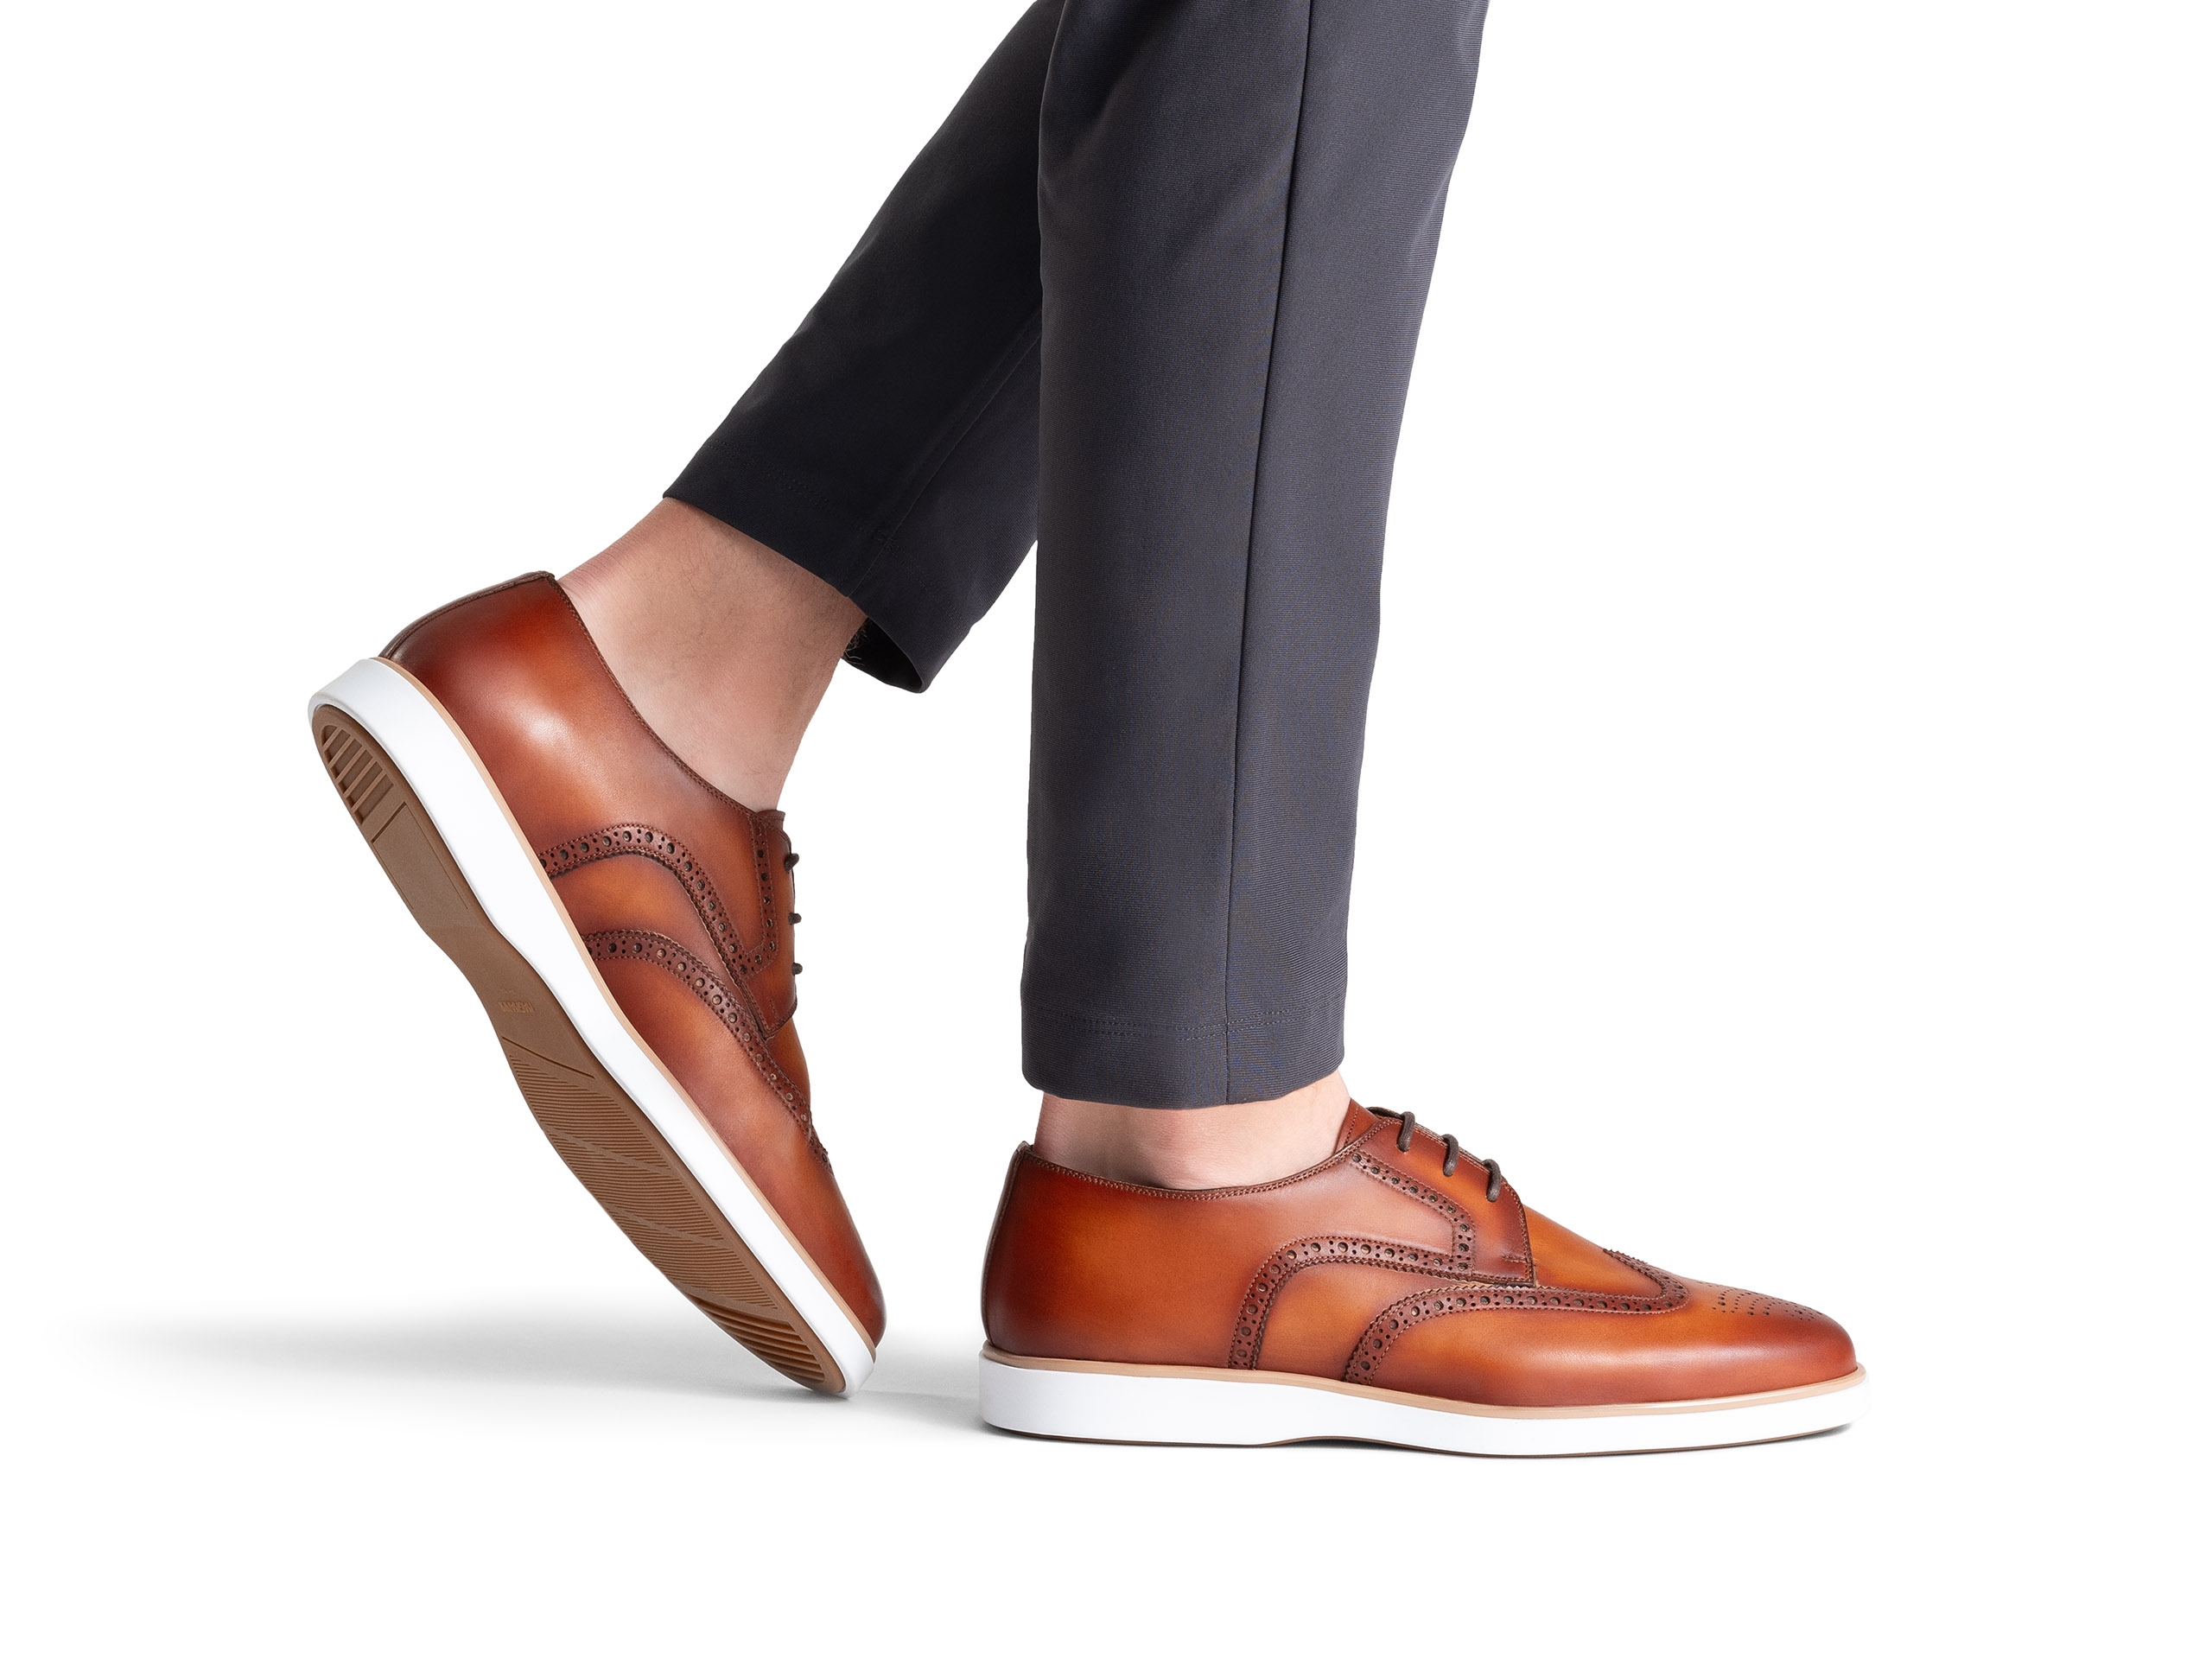 The Leonel Cognac pairs well with grey pants